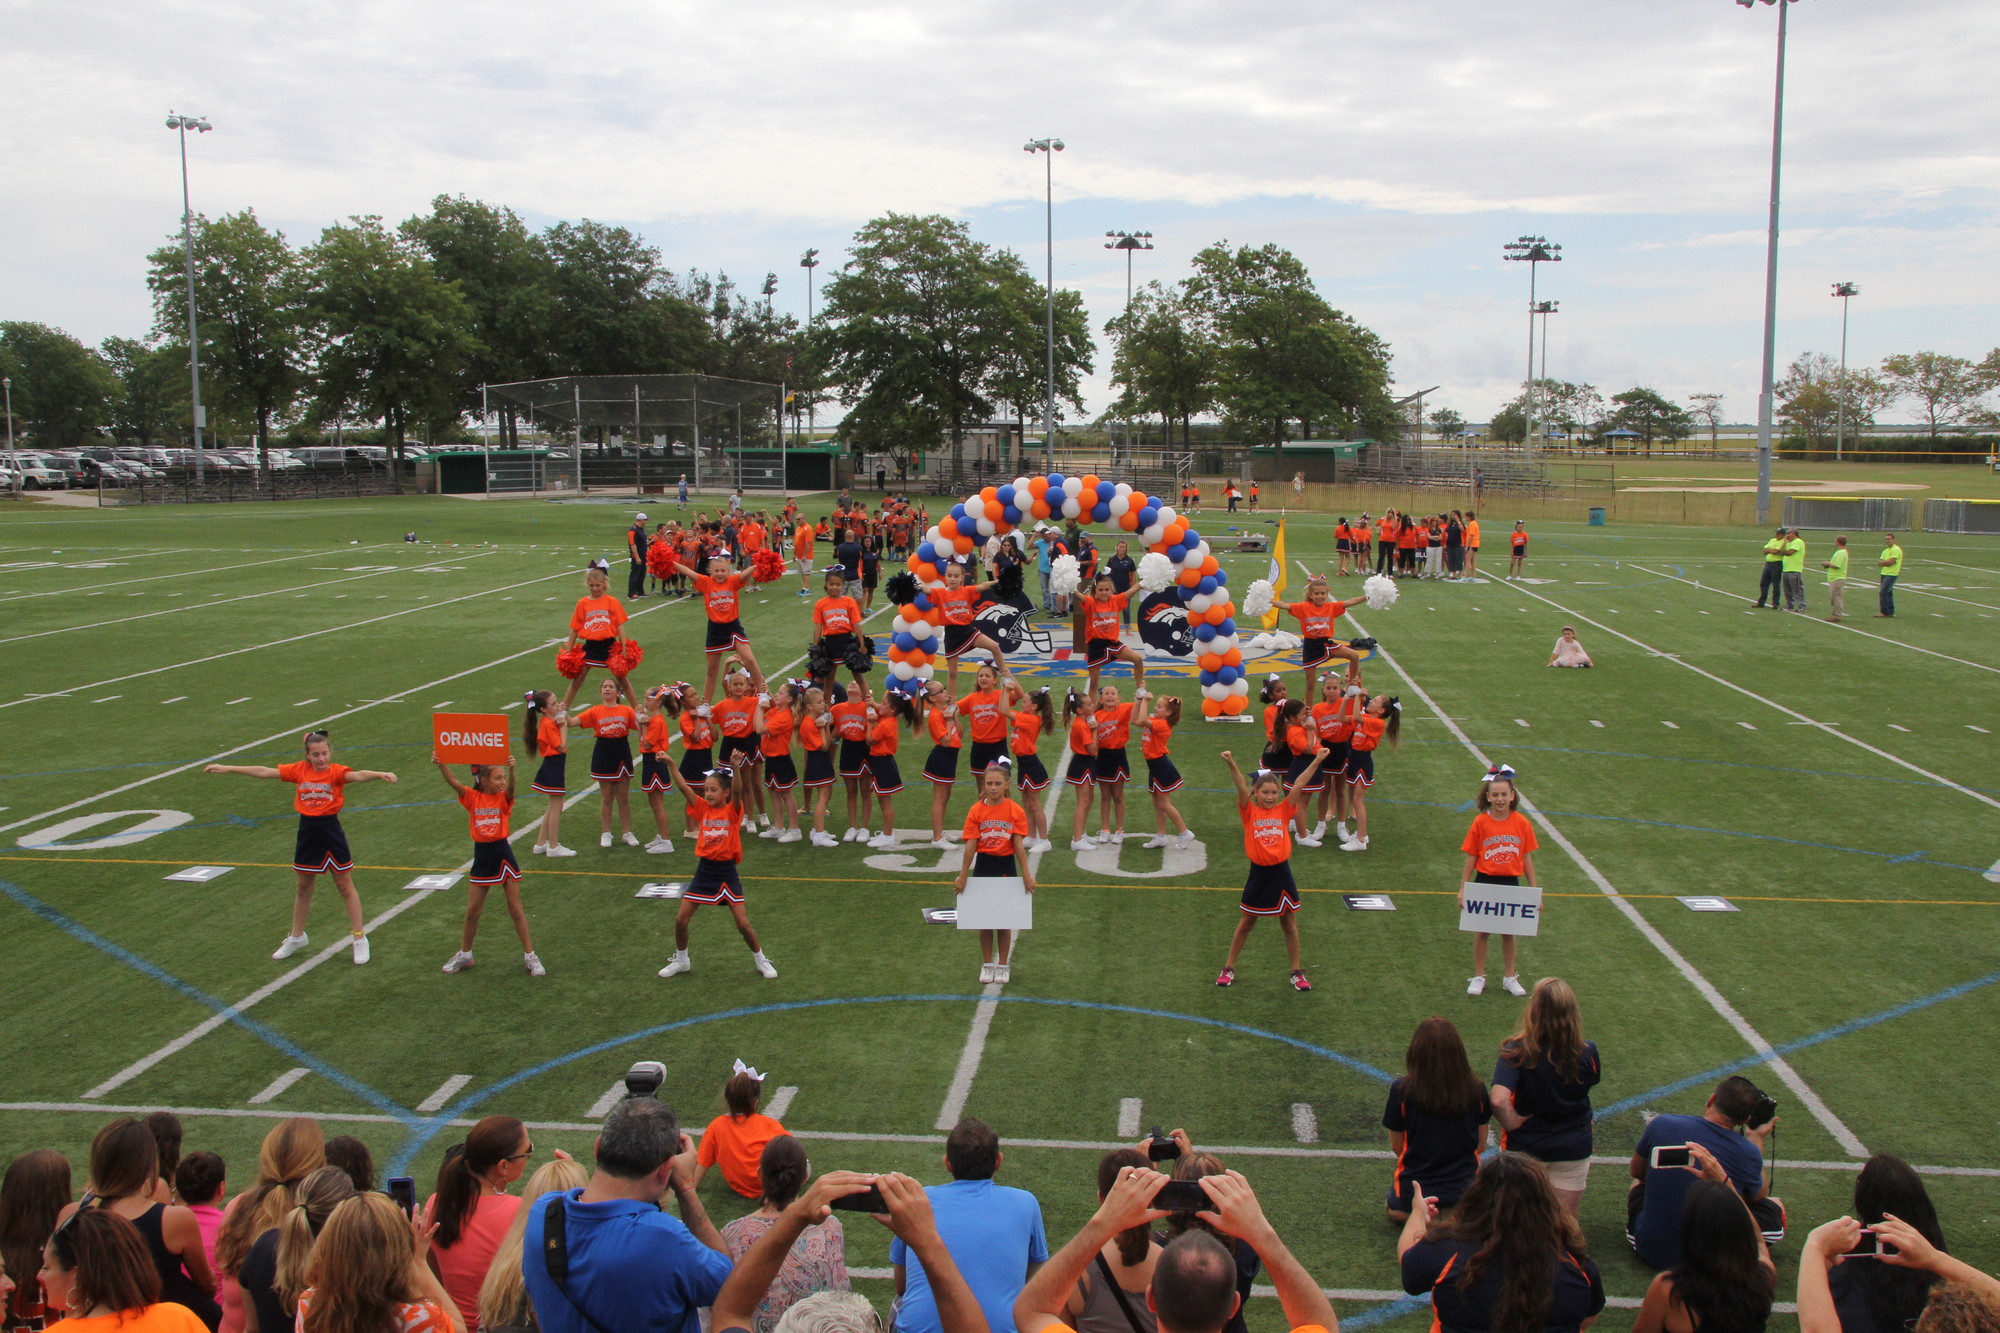 Bronco cheerleaders entertained the crowd at the fall season kick-off on Sept. 12.